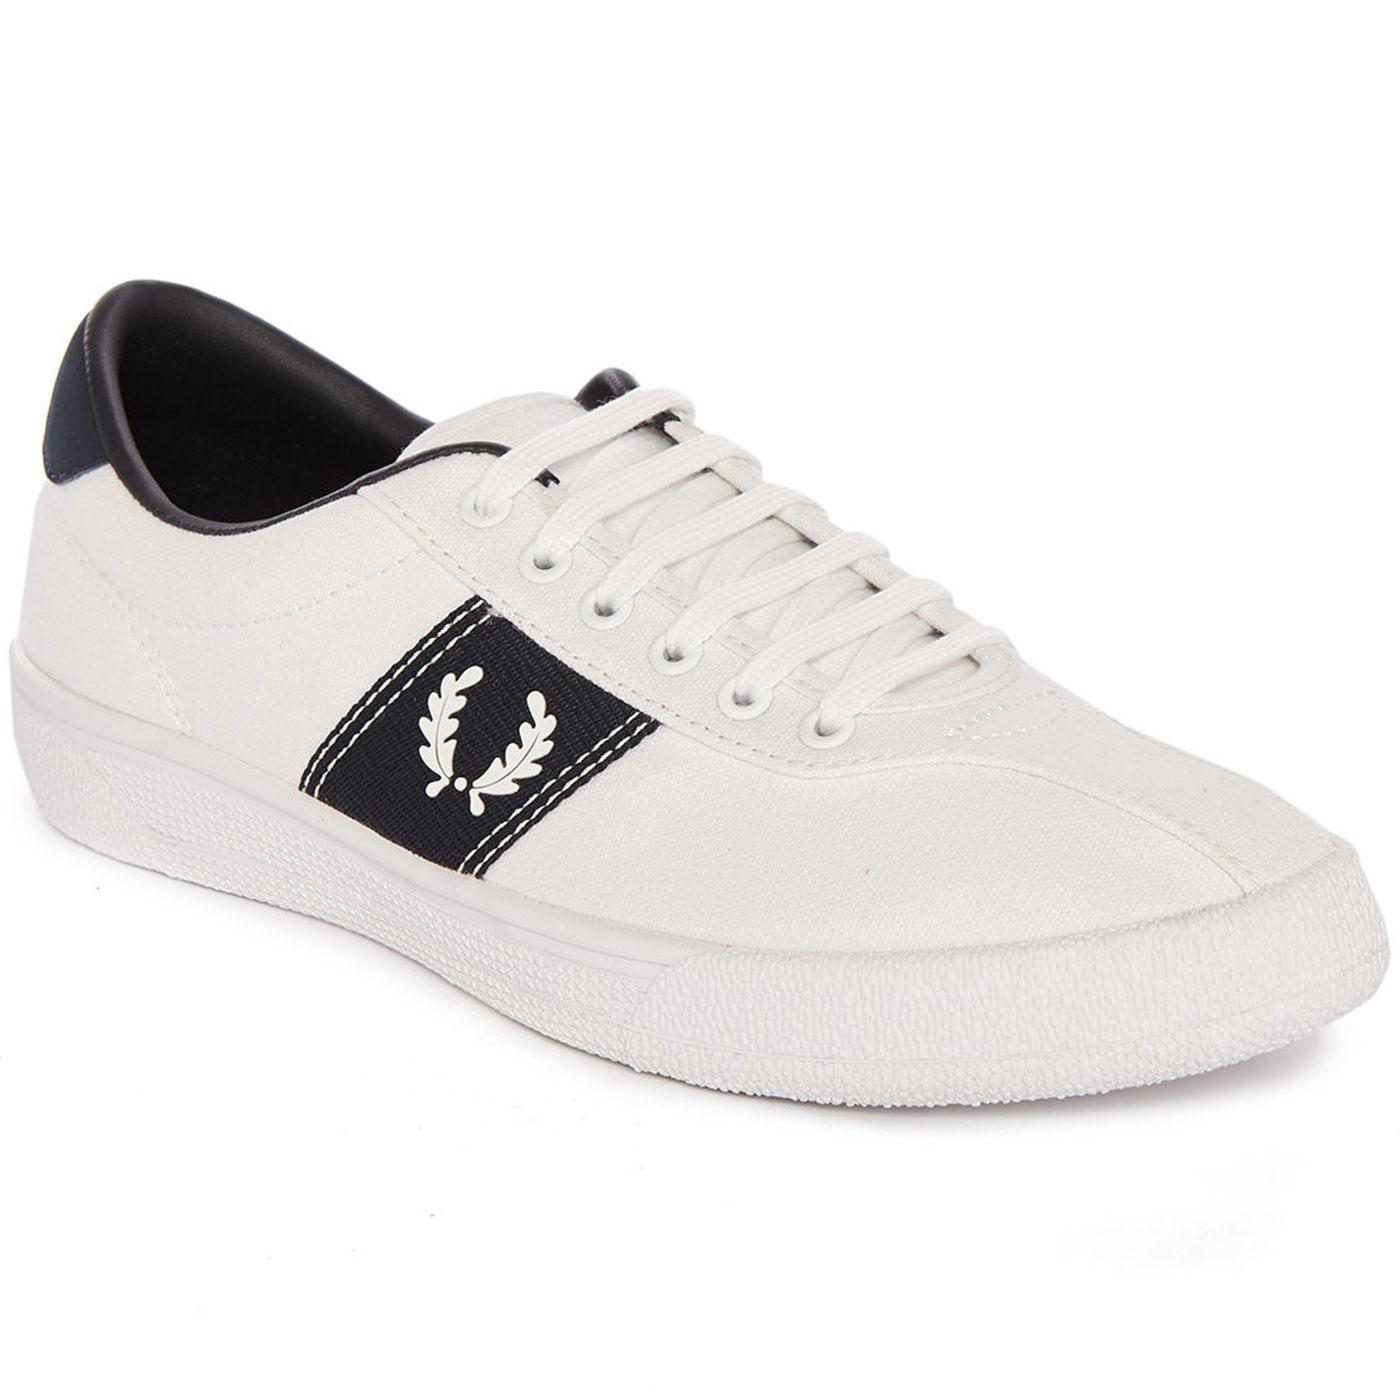 FRED PERRY Mens Retro 70s Tennis Shoes 